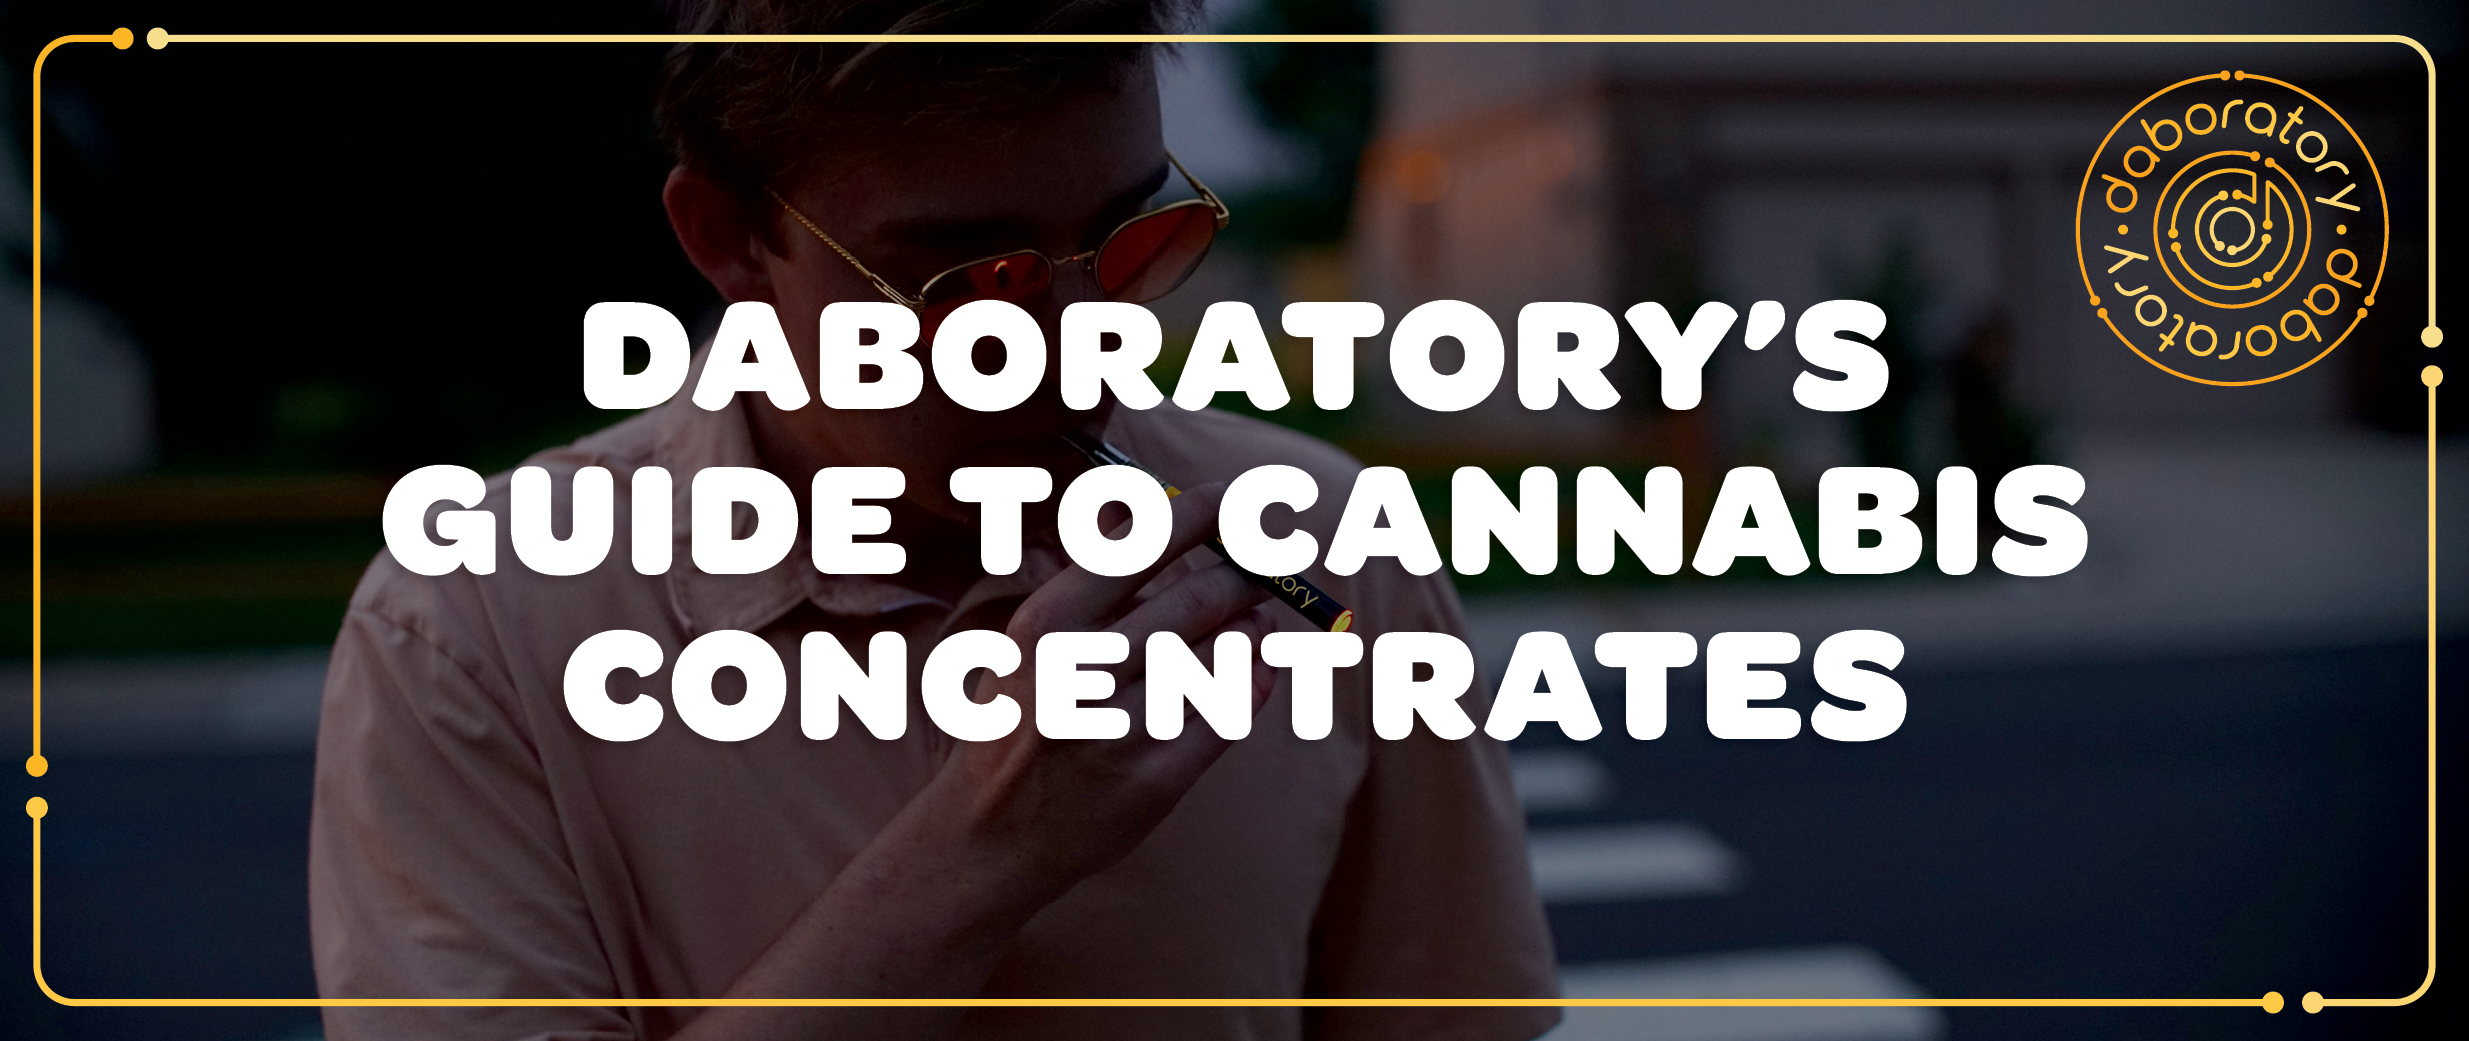 Daboratory's Guide to Cannabis Concentrates